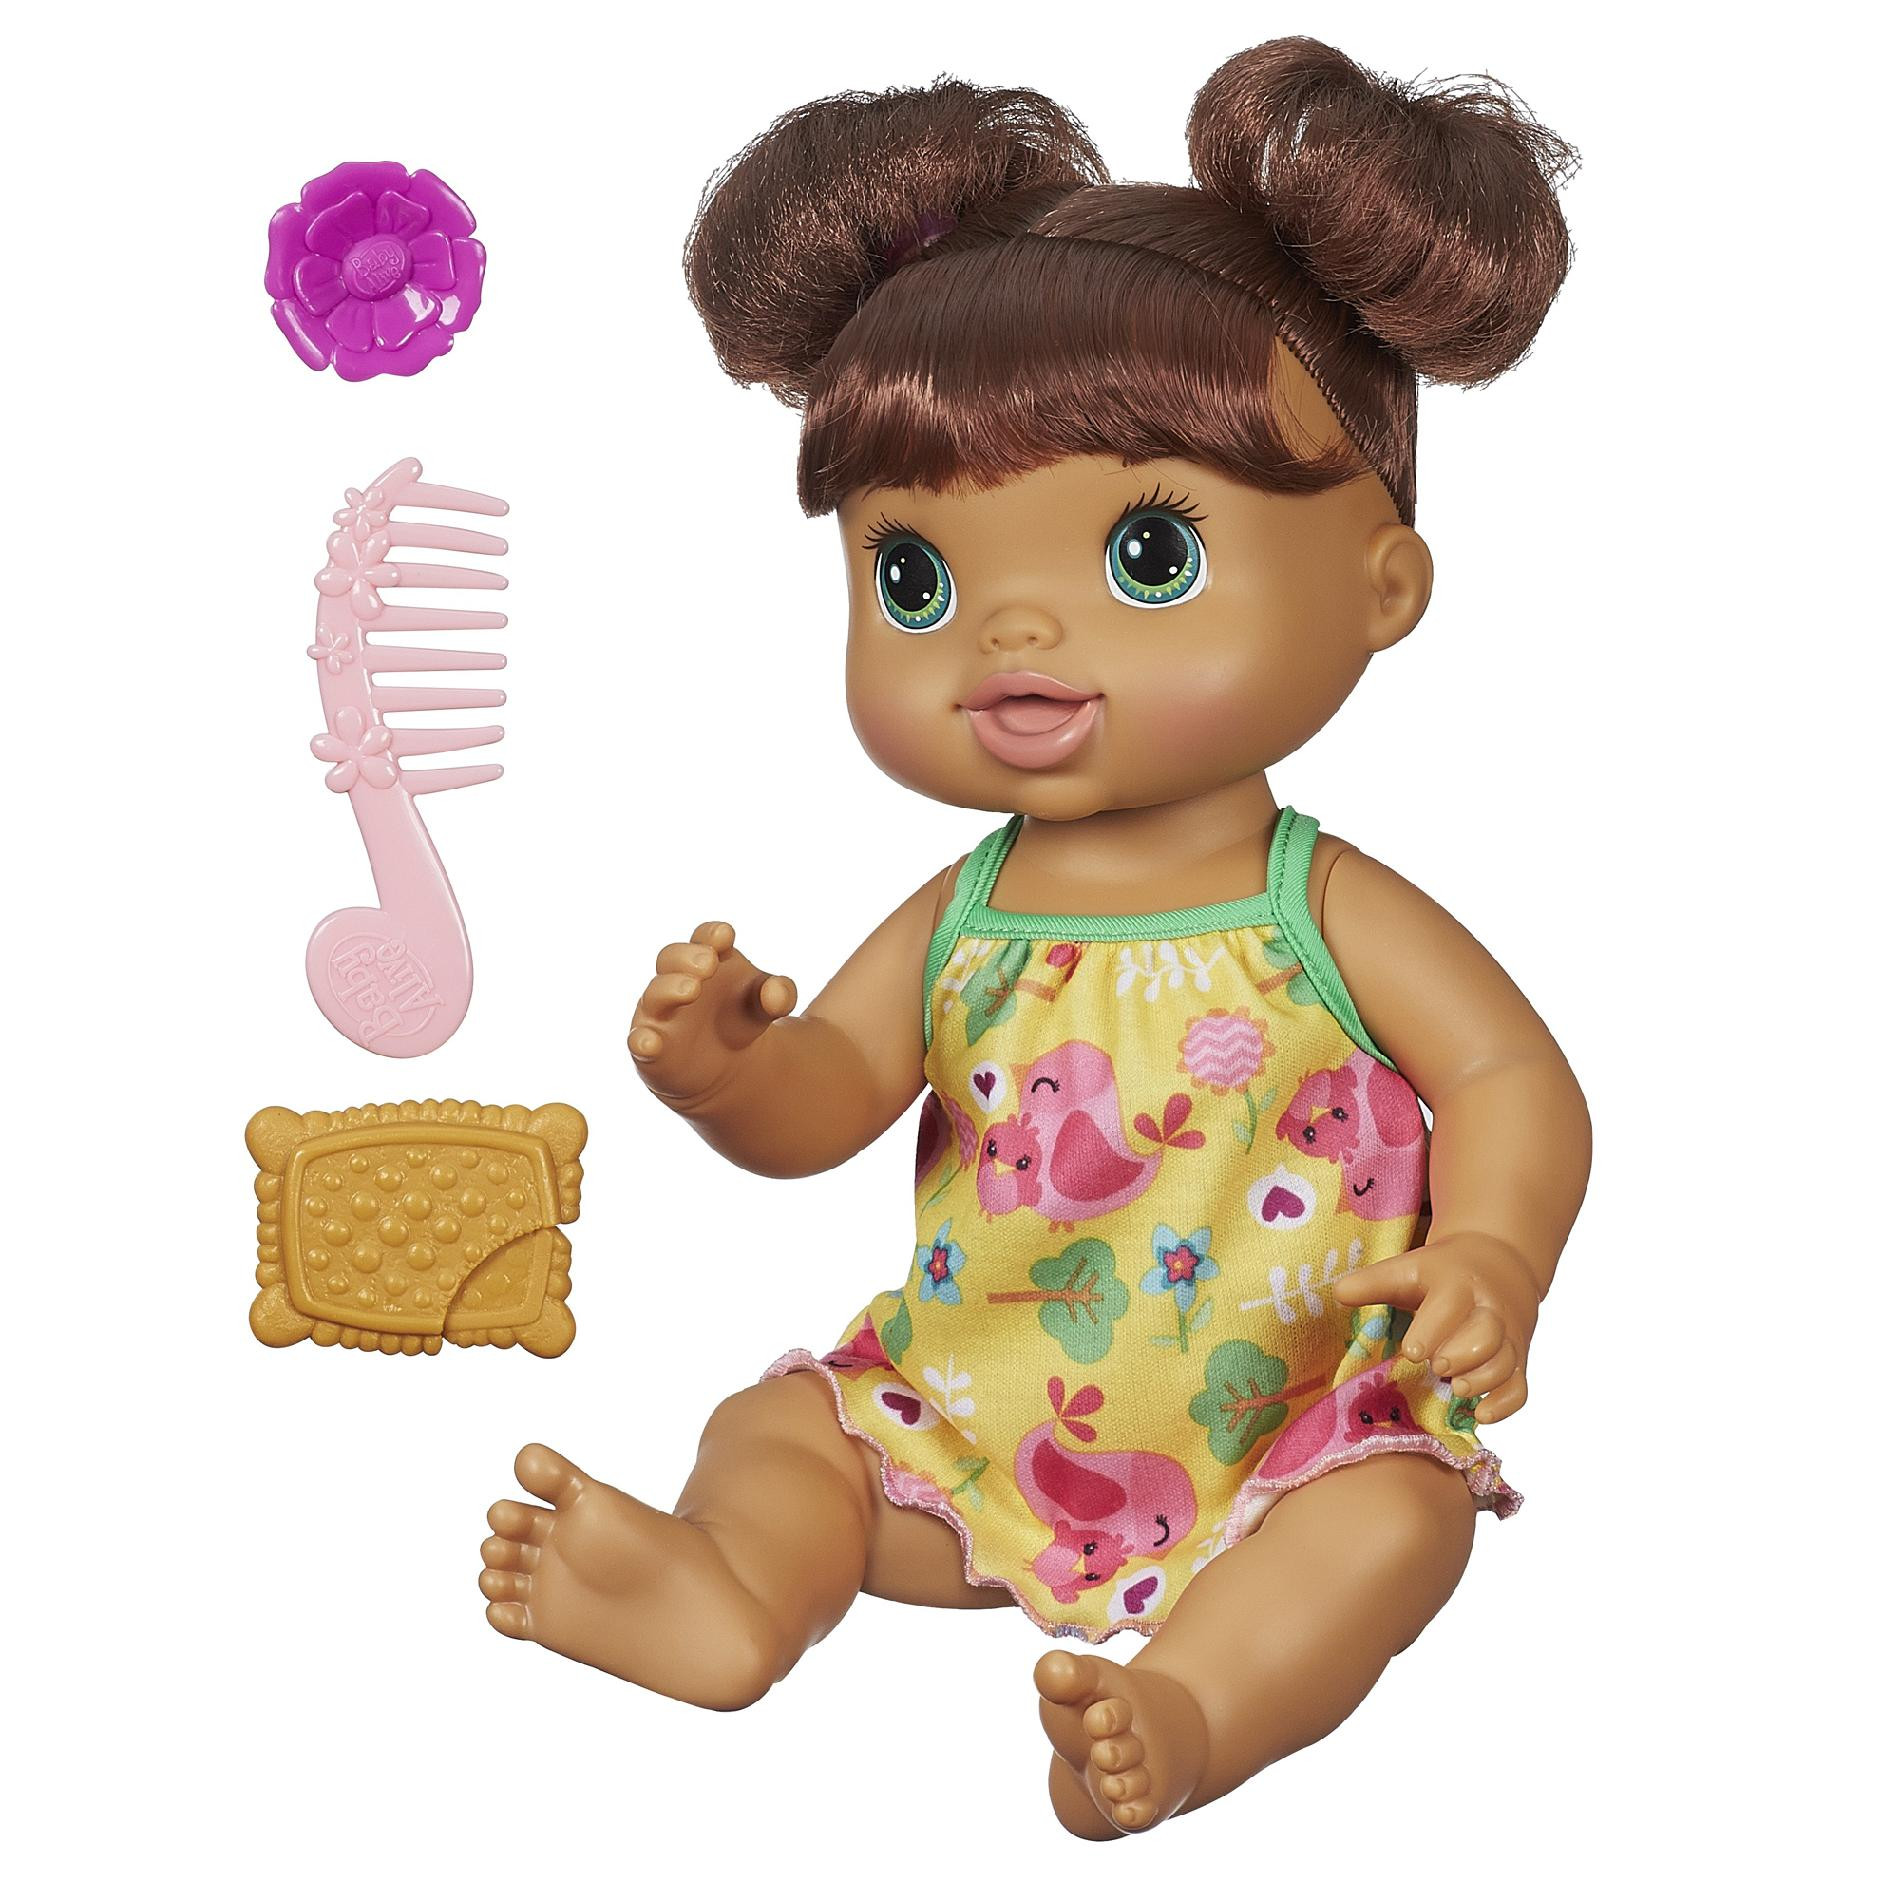 Baby Alive Doll Brown Hair
 Baby Alive Pretty in Pigtails Baby Doll Brown Hair Kmart